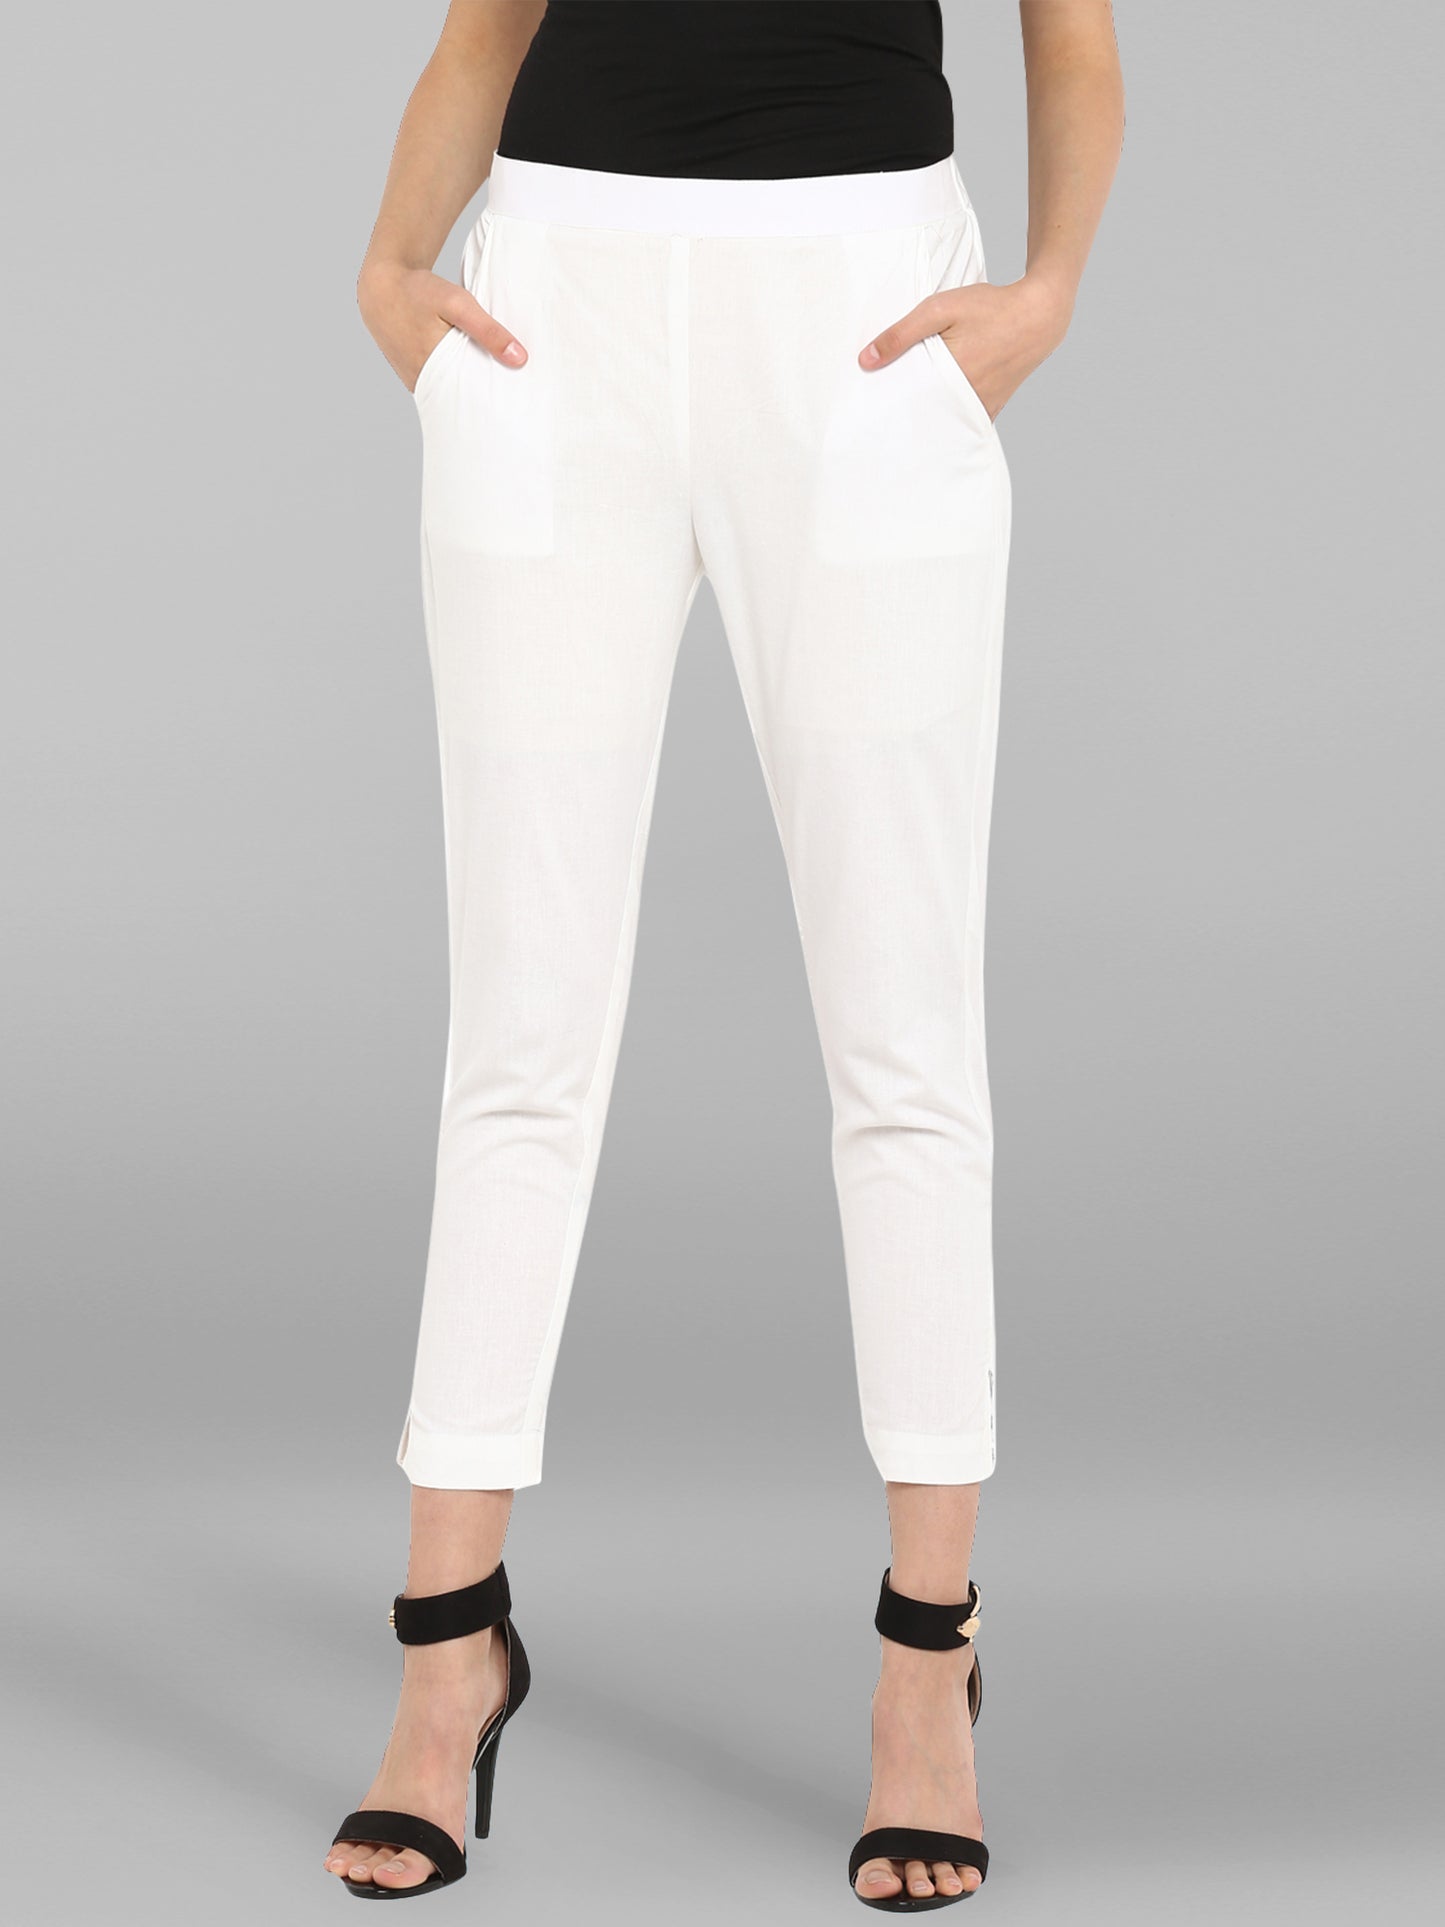 White Cotton Trouser with Smart Fit and extra Comfort